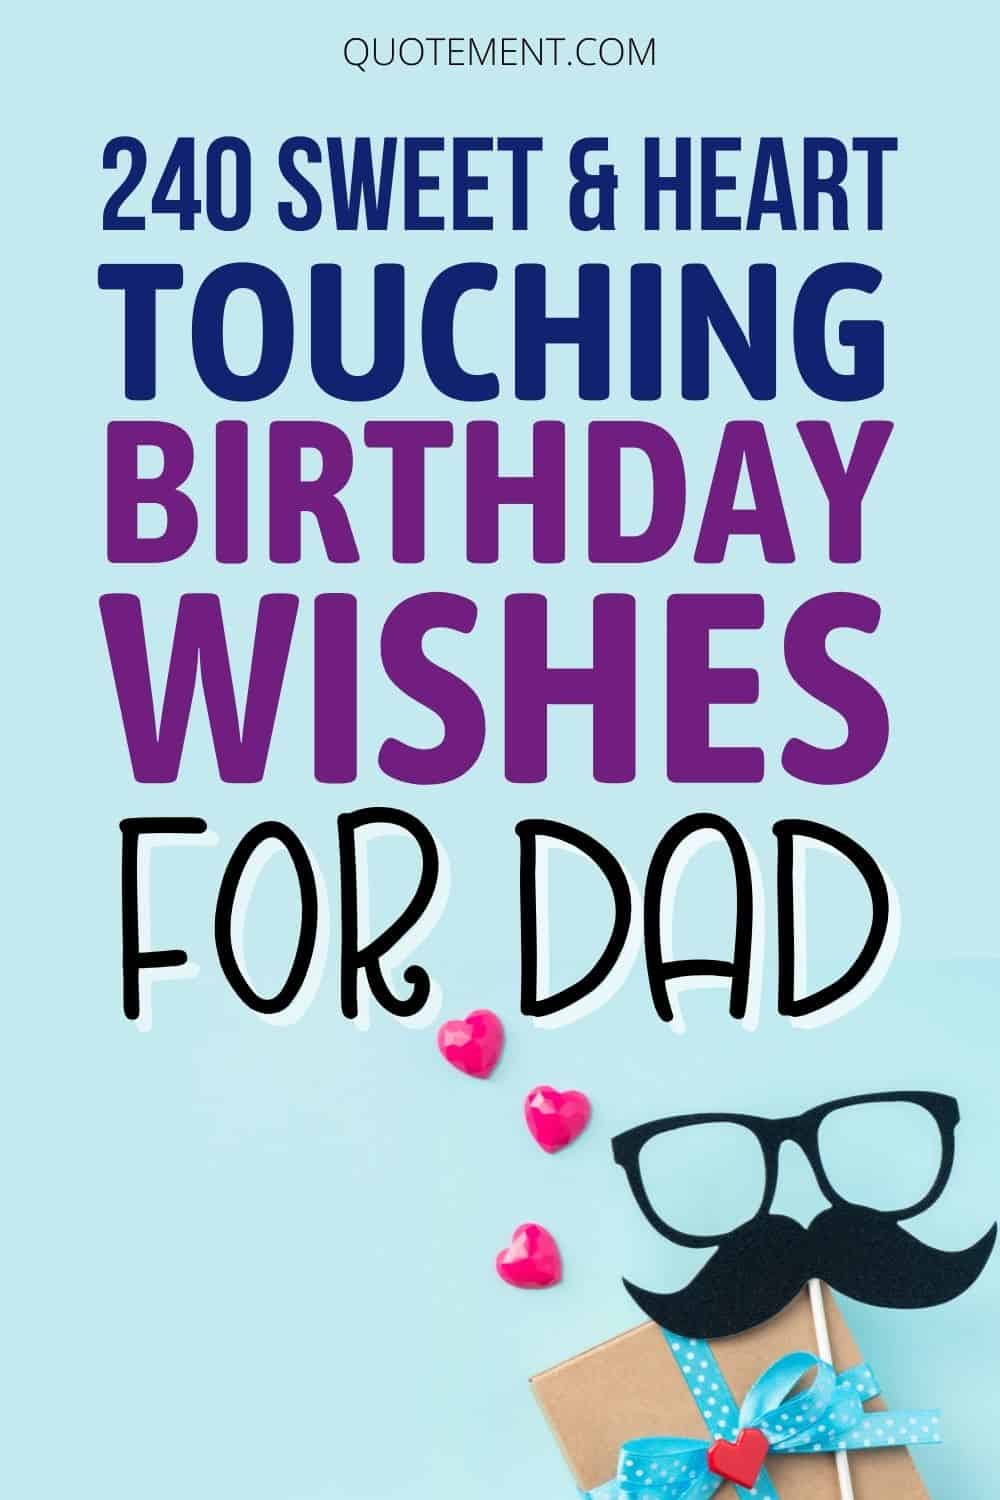 240 Sweet & Heart Touching Birthday Wishes For Dad 